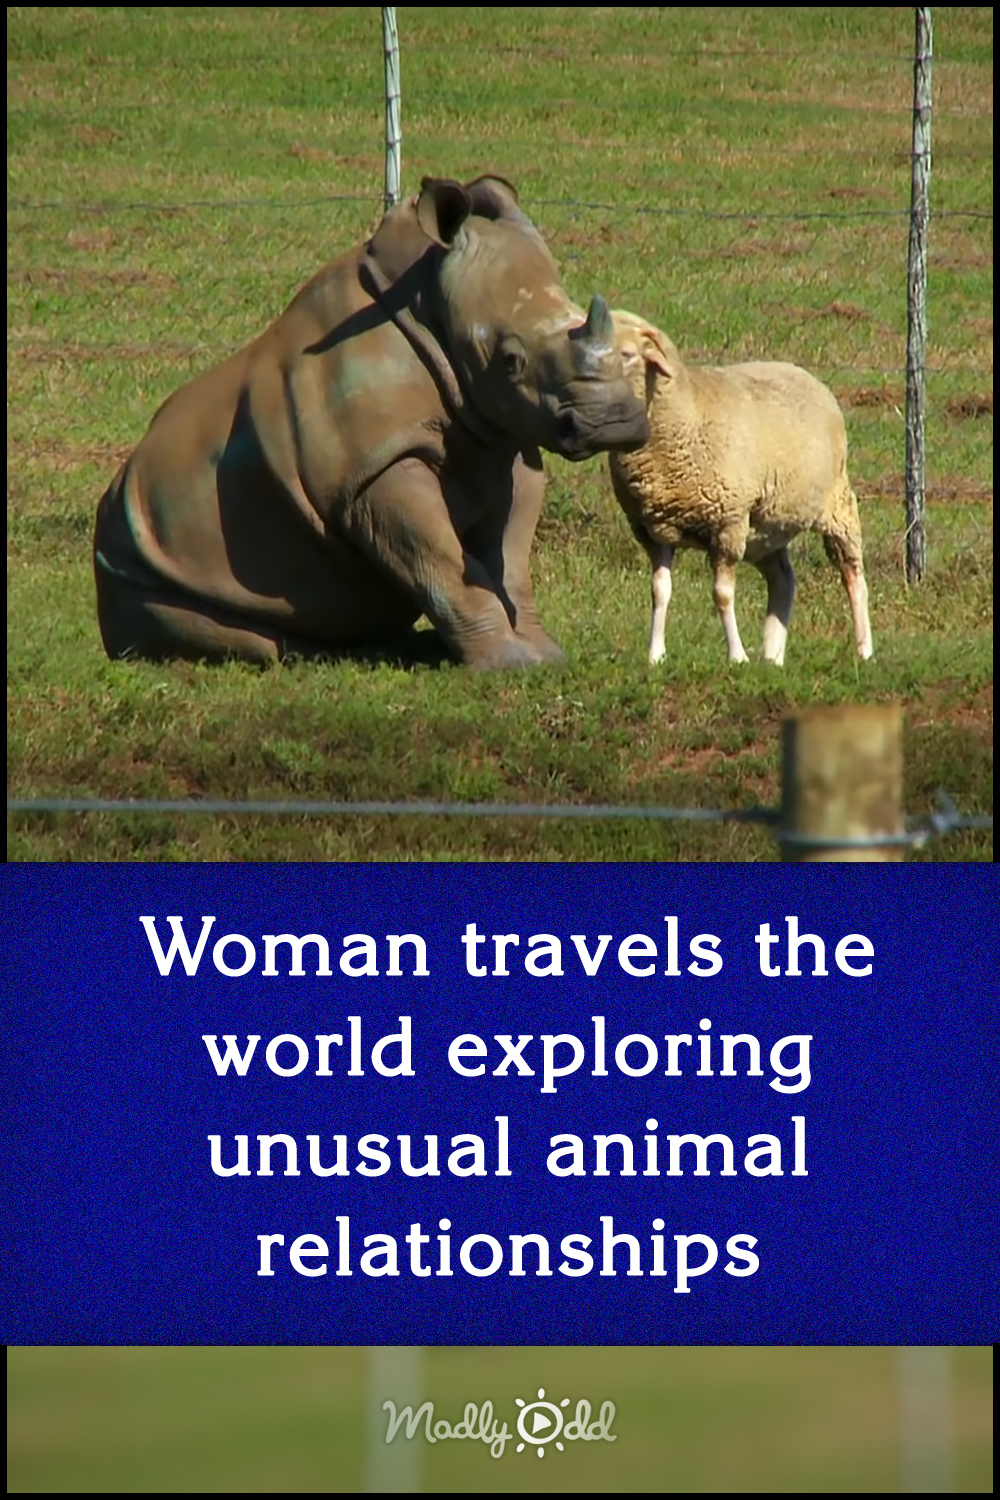 Woman travels the world exploring unusual animal relationships